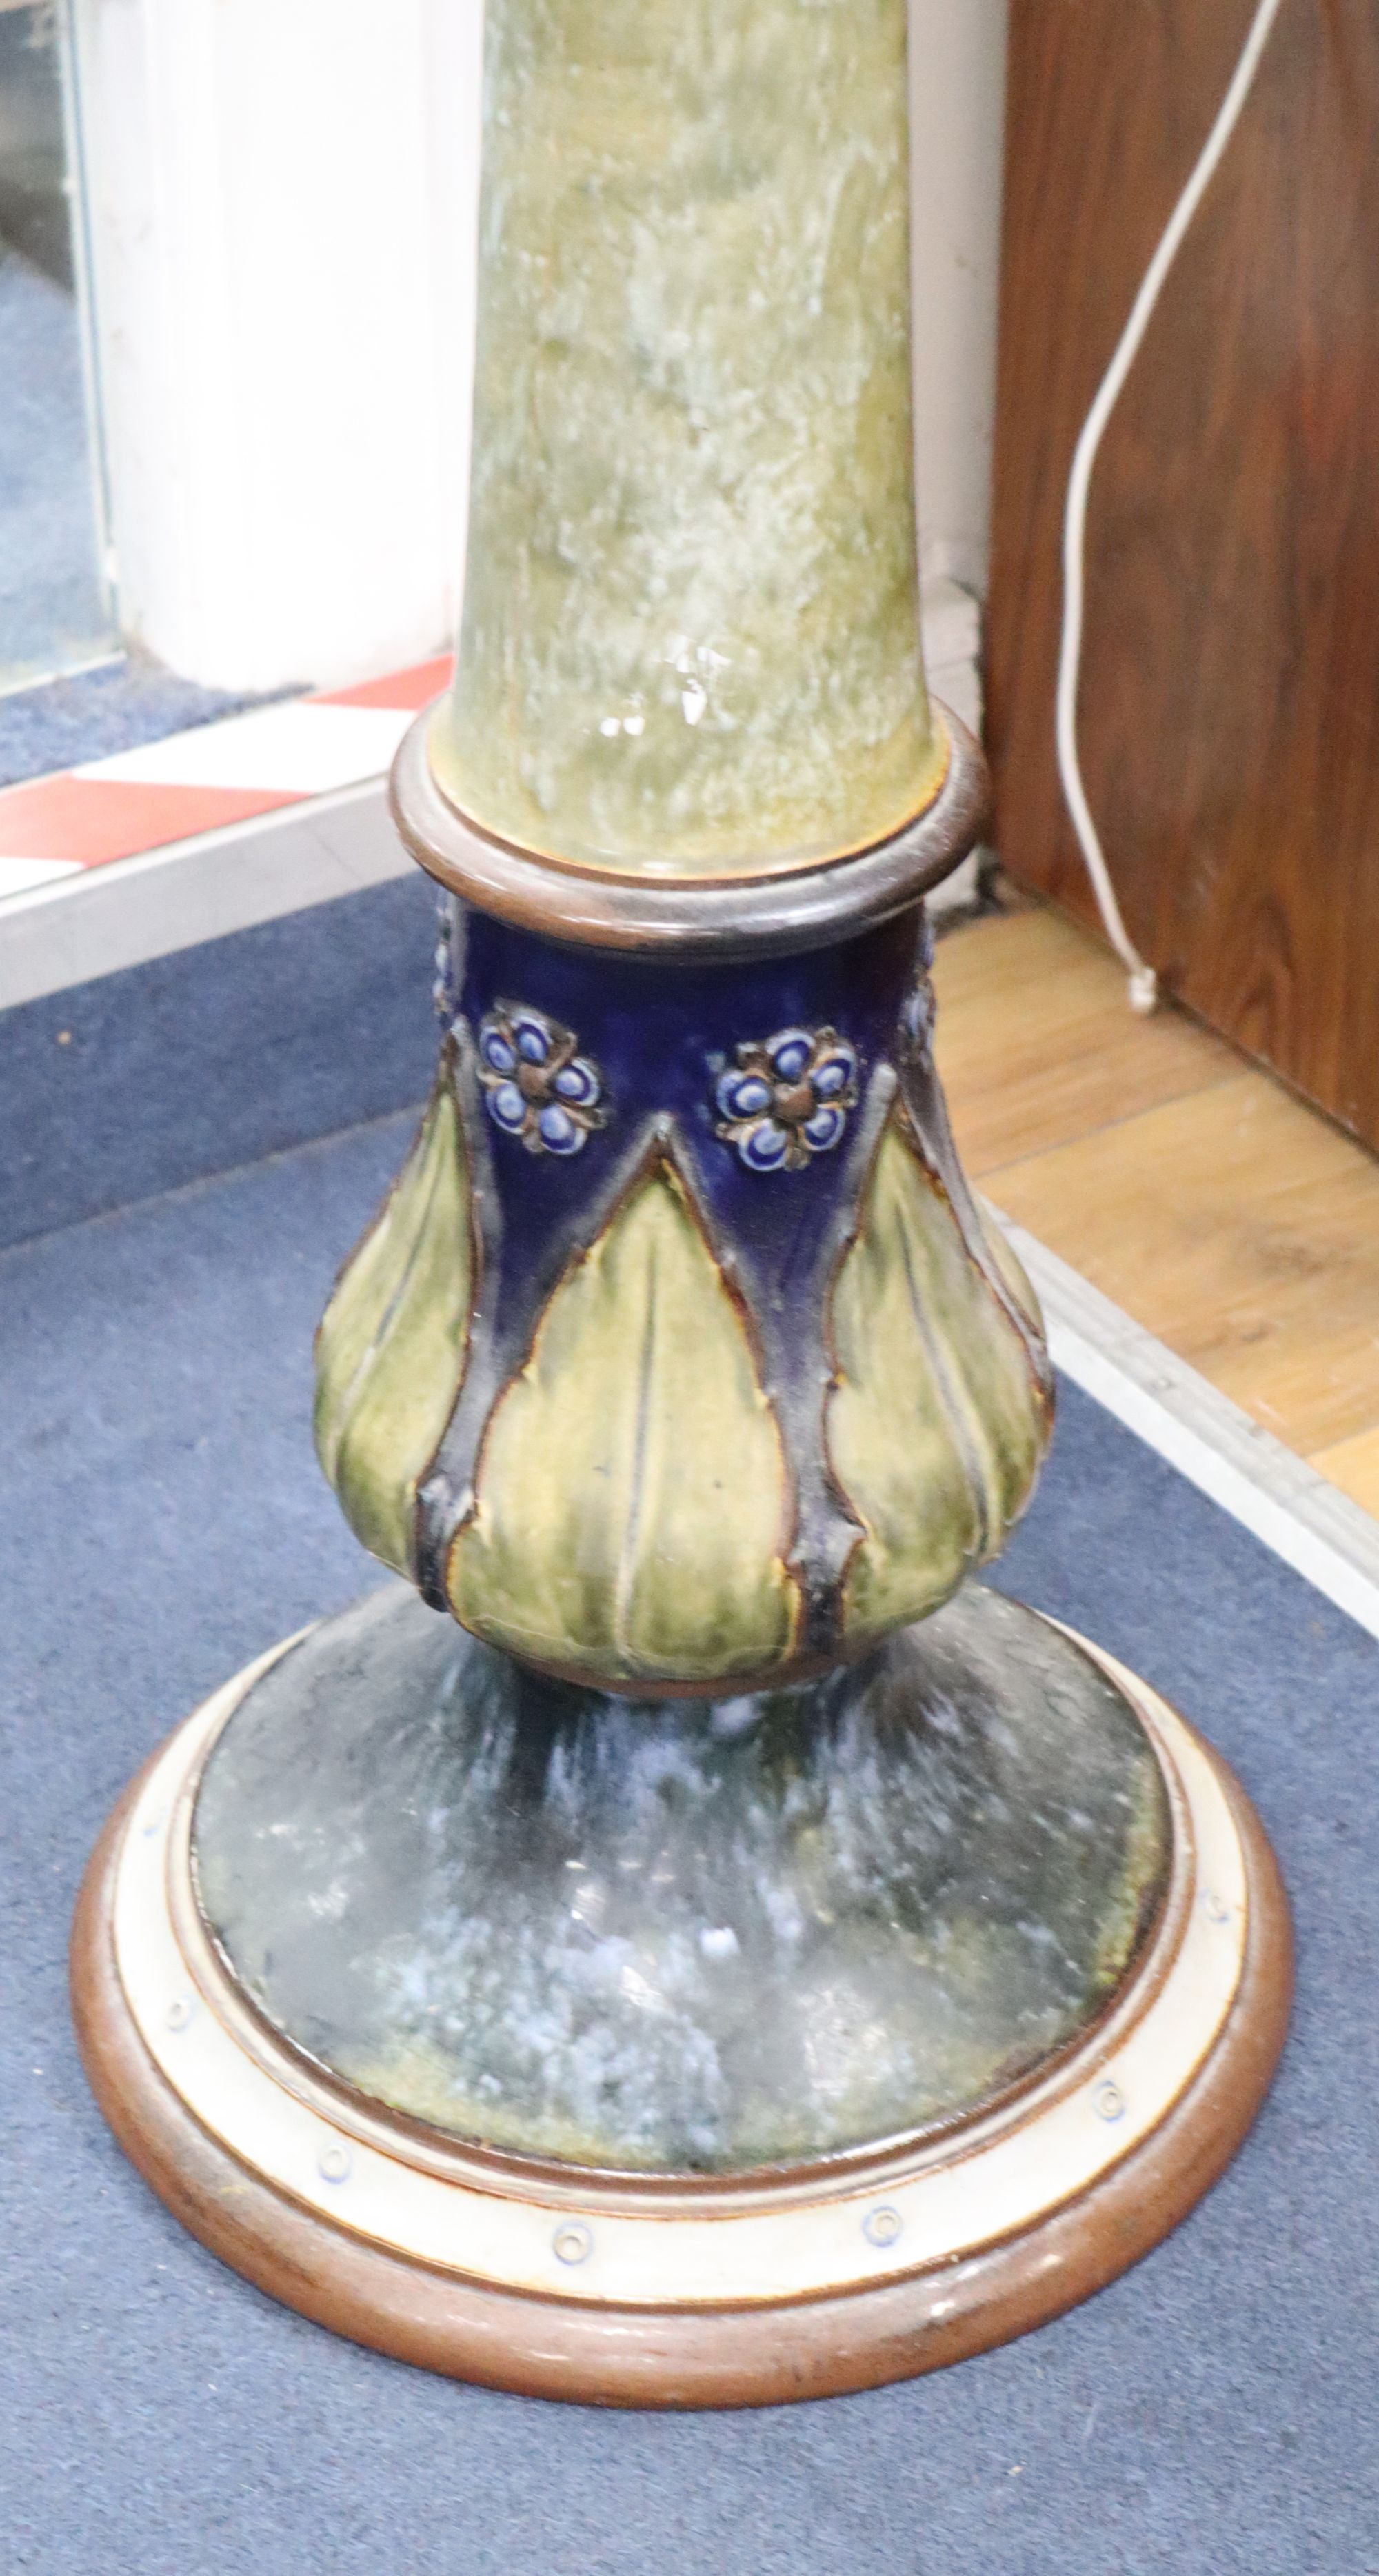 A Royal Doulton jardiniere on stand, overall height 103cm